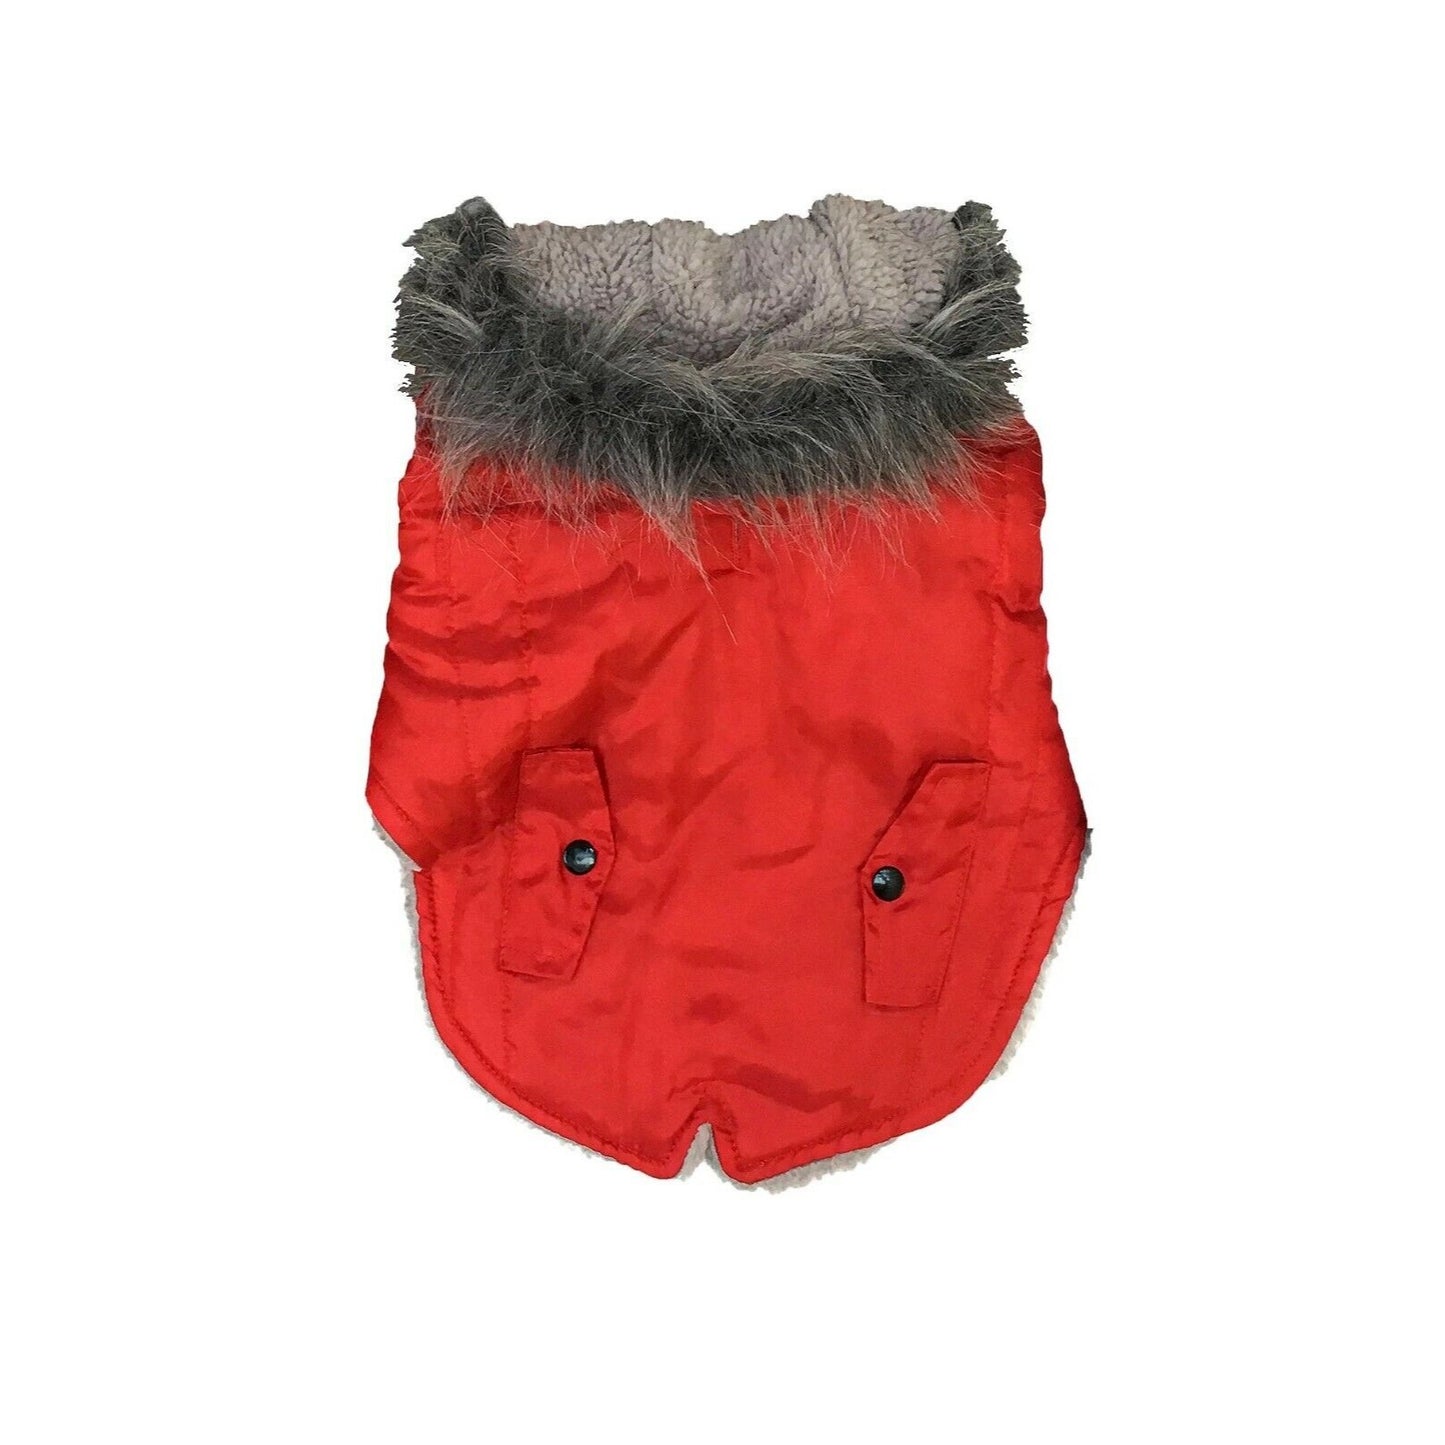 Dog Red Jacket Size Small Woof Pet Puffer Hooded Grey  Lined Fur around Hood